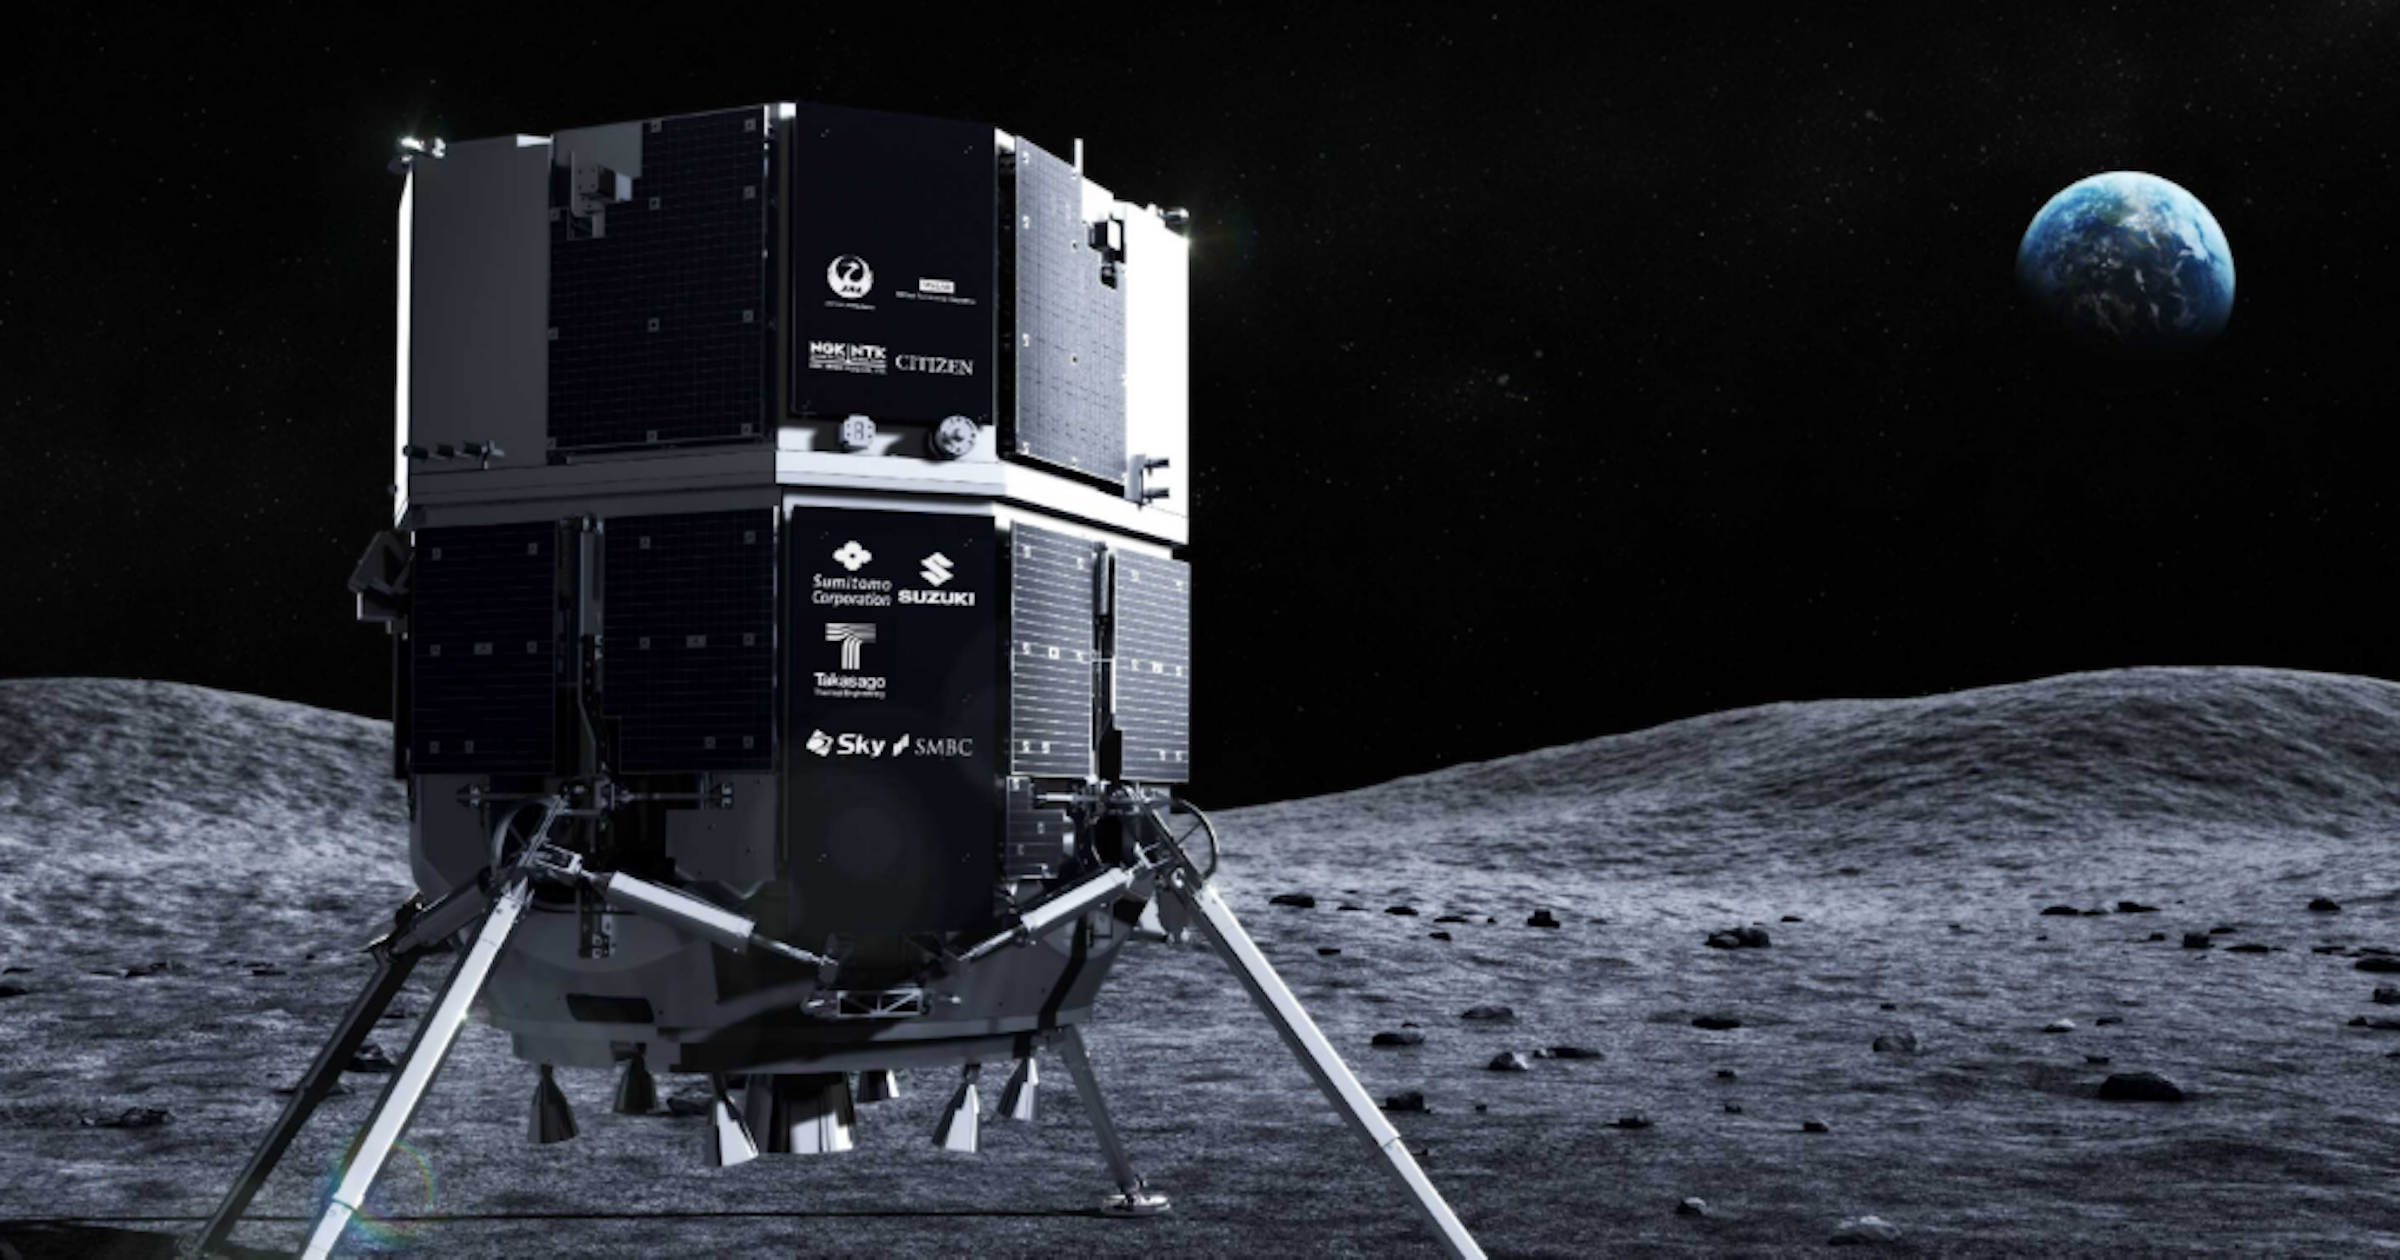 Japan is preparing to launch the first spacecraft to the moon